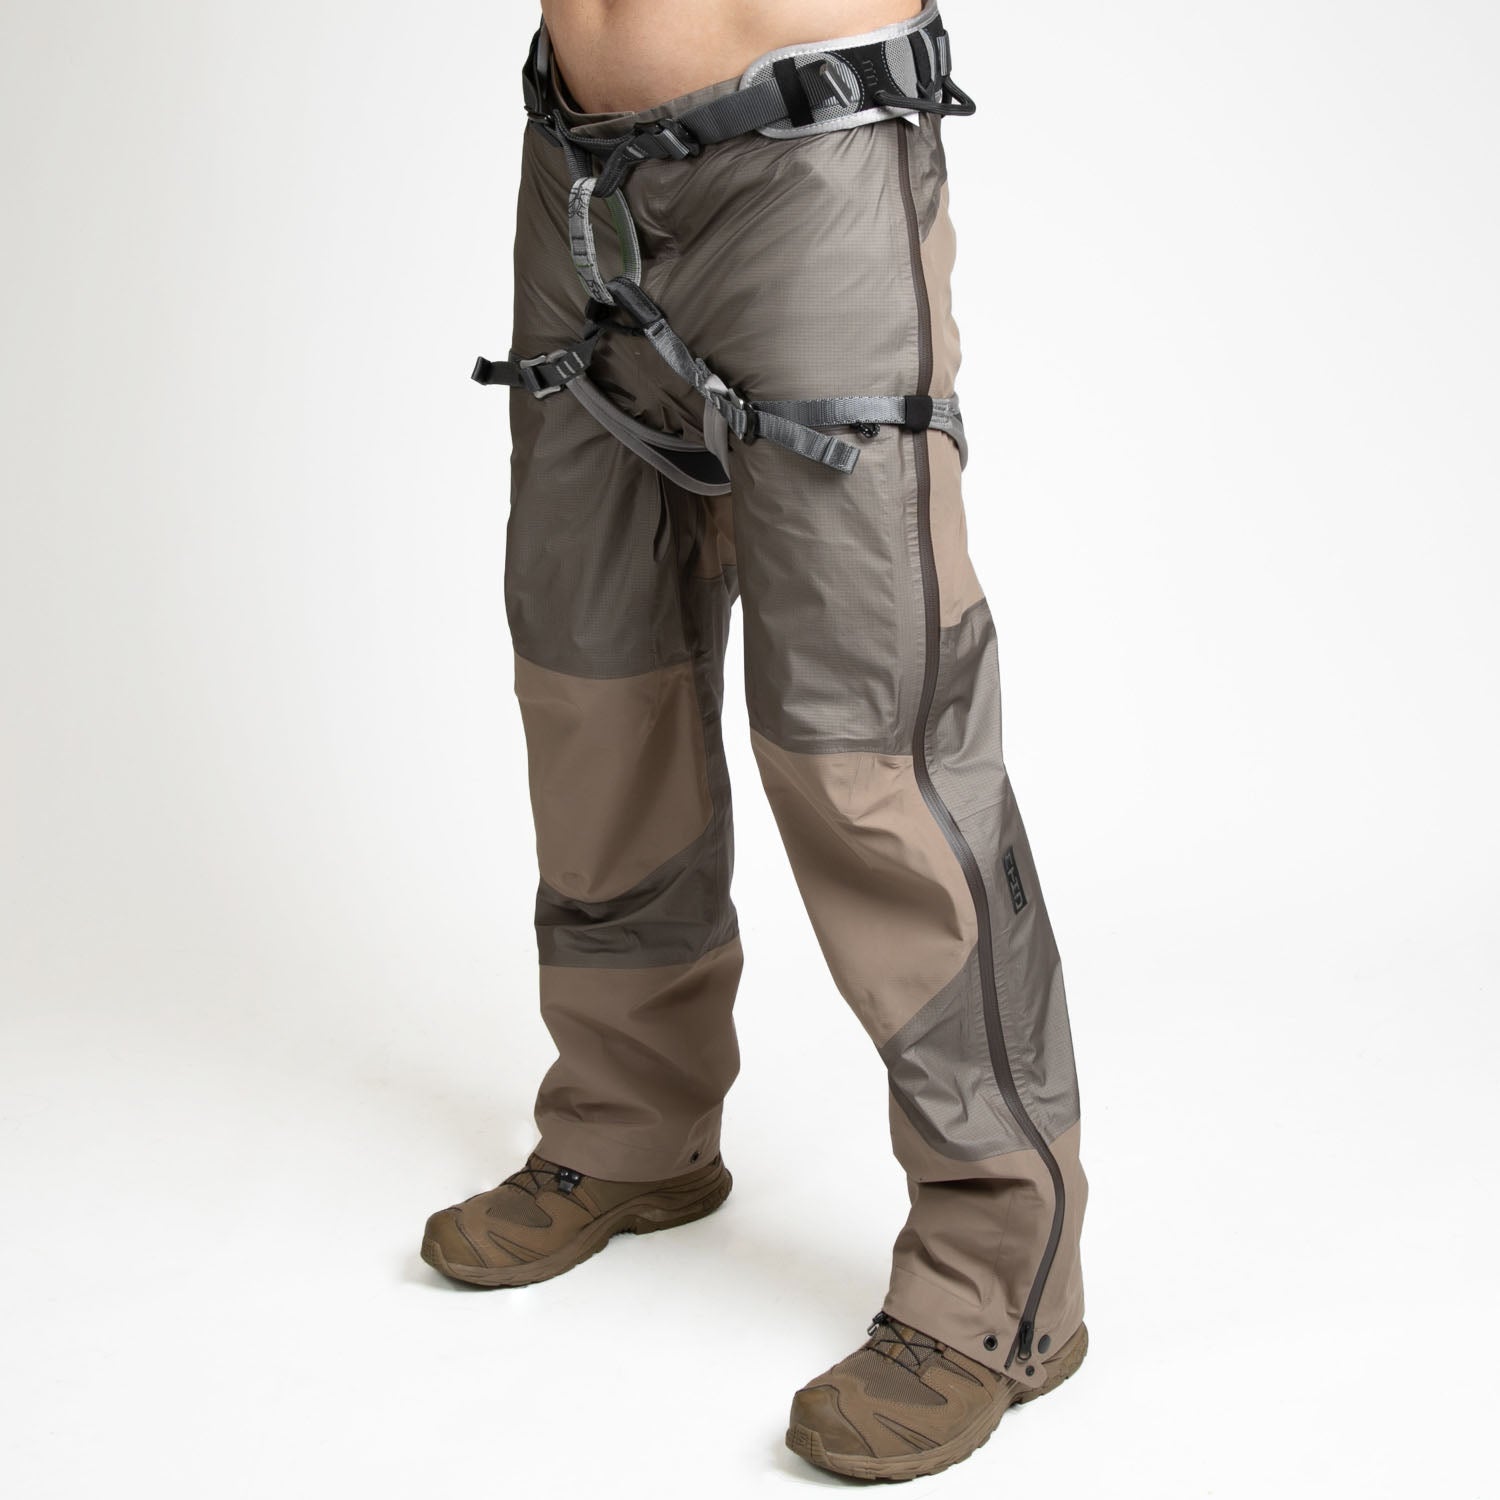 MTHD Mountain eVent™ DVstorm DVexpedition Hardshell 3L Pant L5 Apparel MTHD 